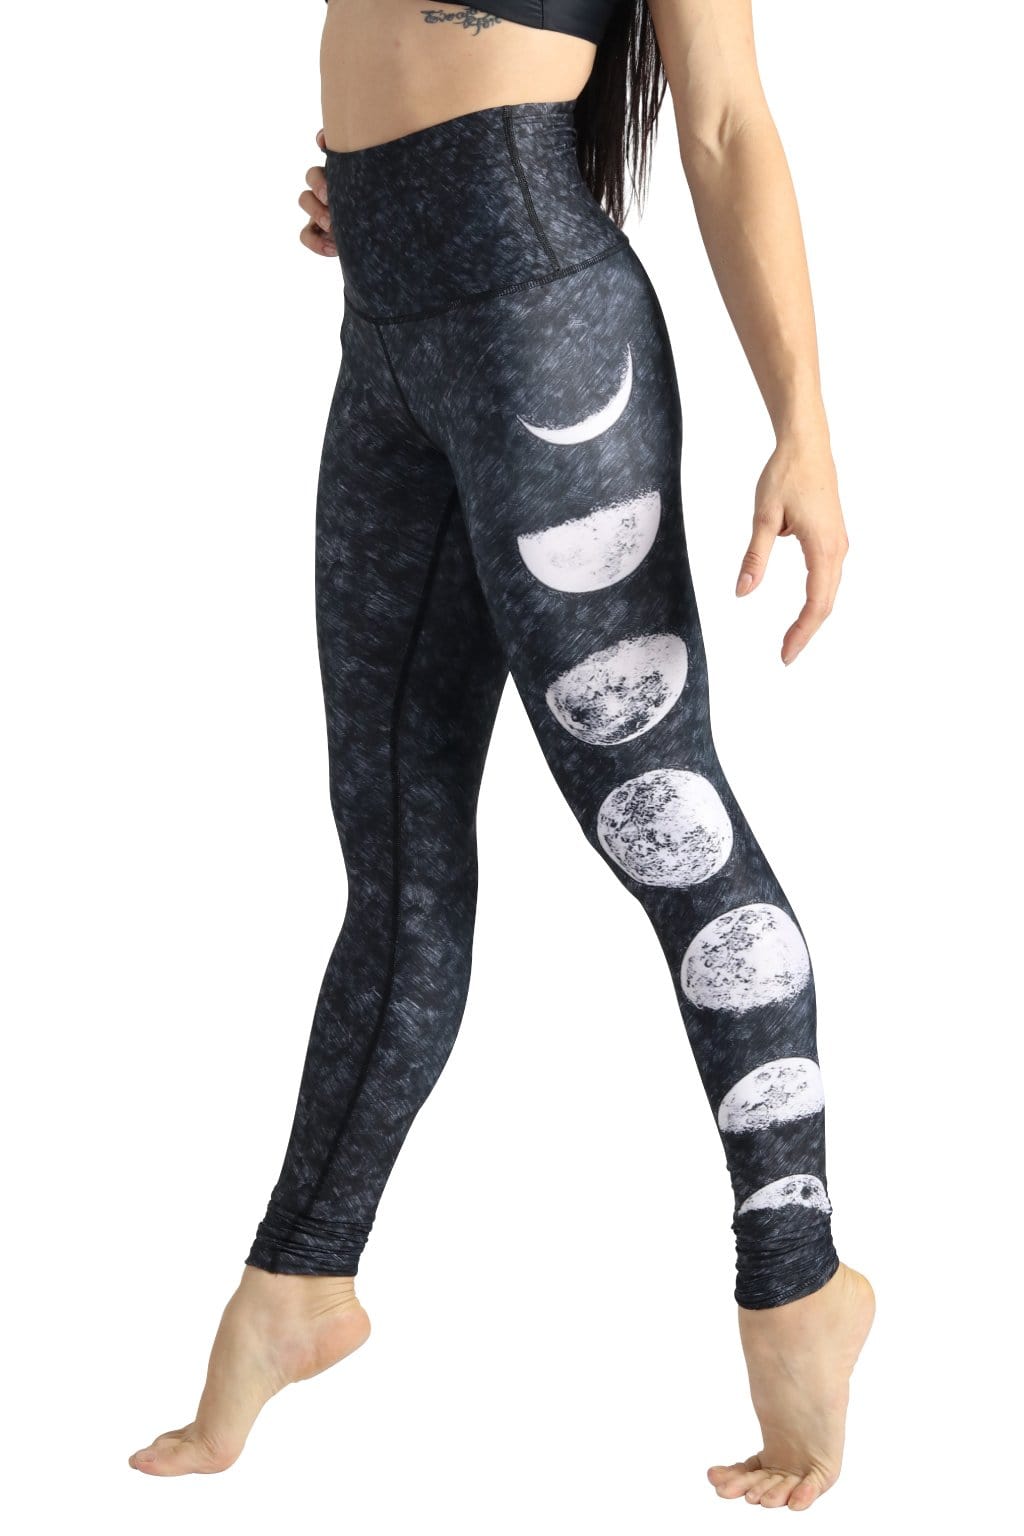 mwbay Womens Lighting 3D Print Galaxy Leggings Fitness Legins Over Size  S-4XL Black at Amazon Women's Clothing store